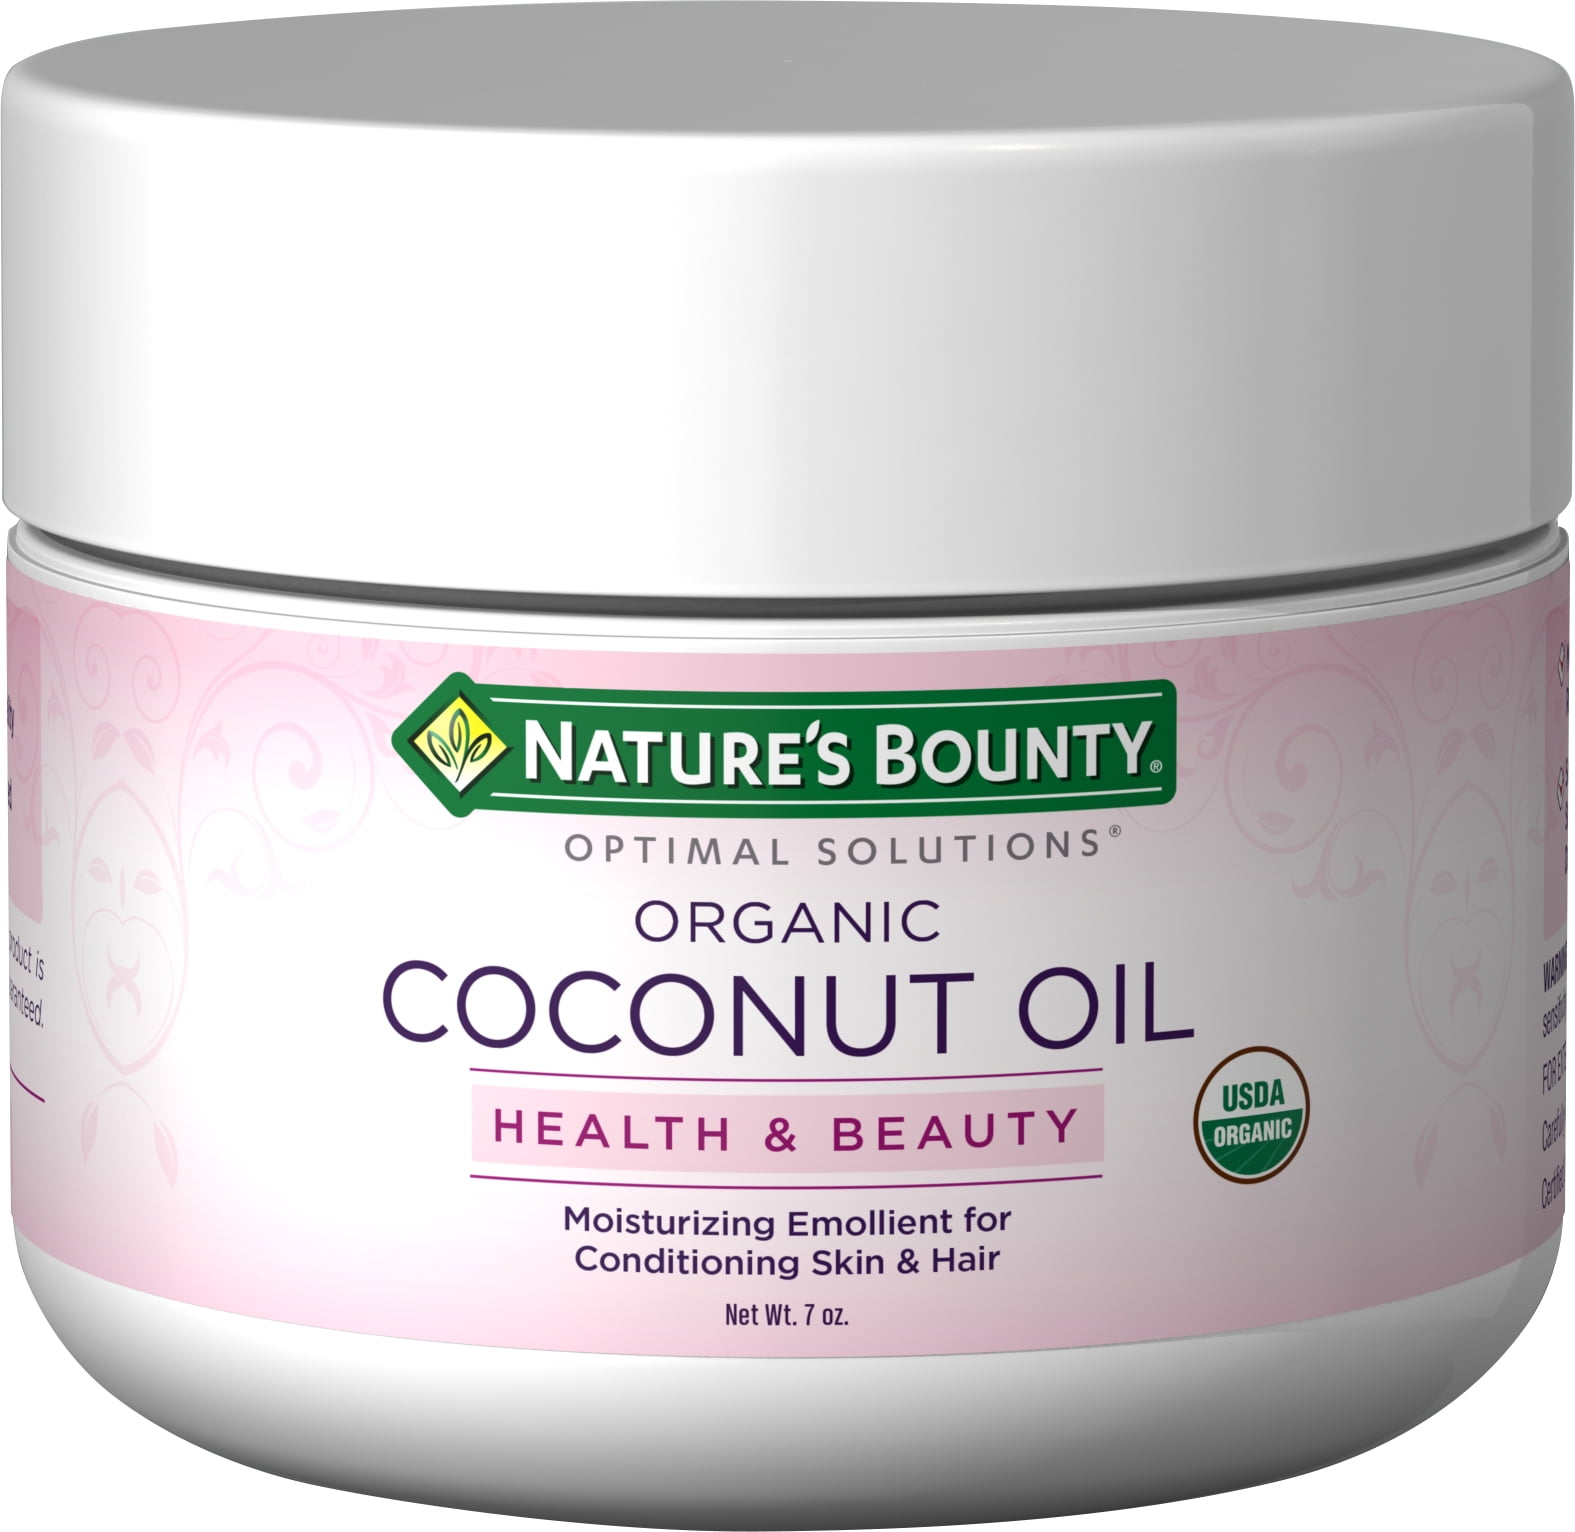 Nature's Bounty Optimal Solutions Health & Beauty Organic Coconut Oil ...